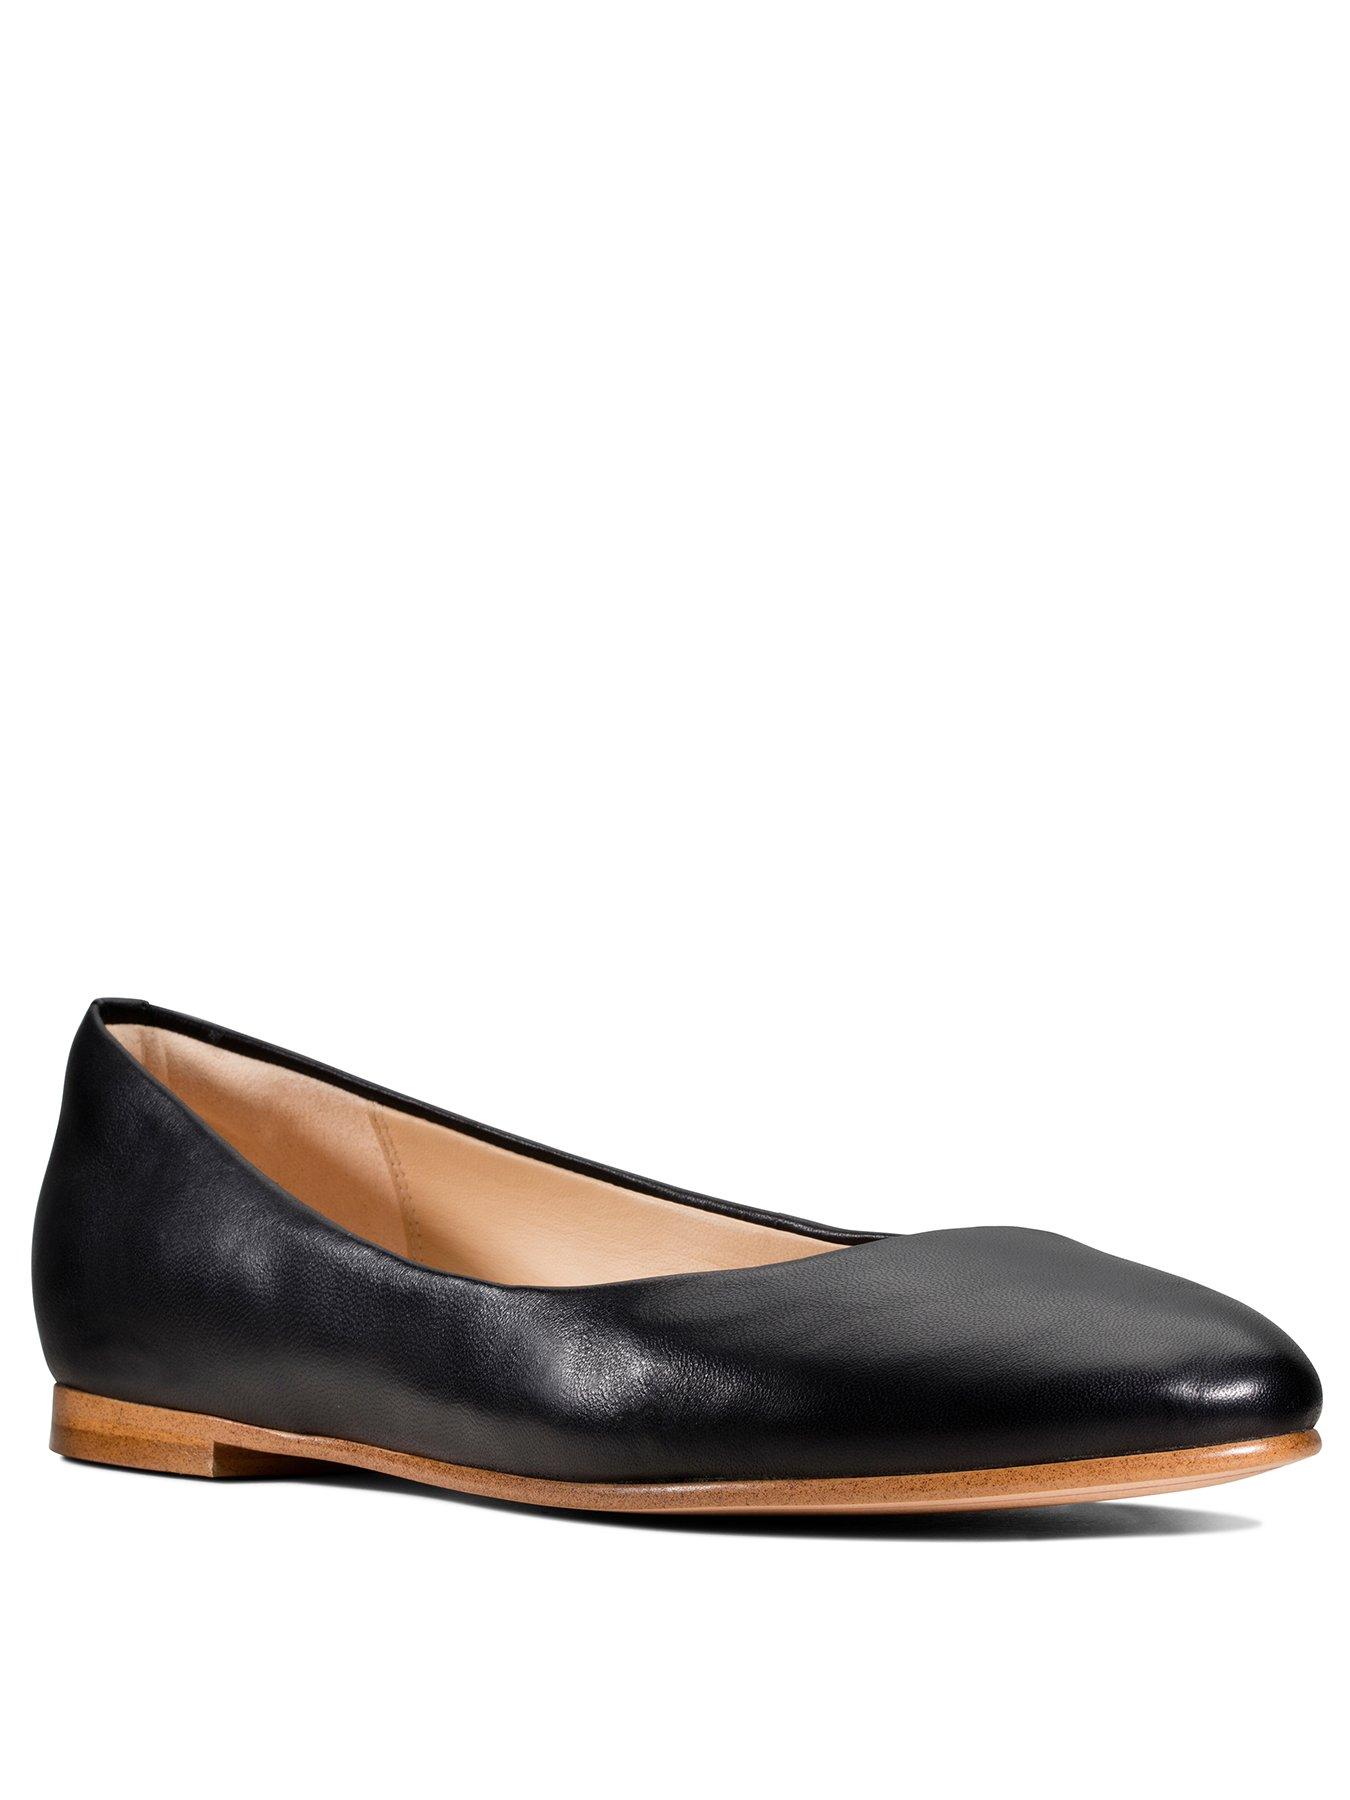 Clarks Shoes | Womens Clarks Shoes 